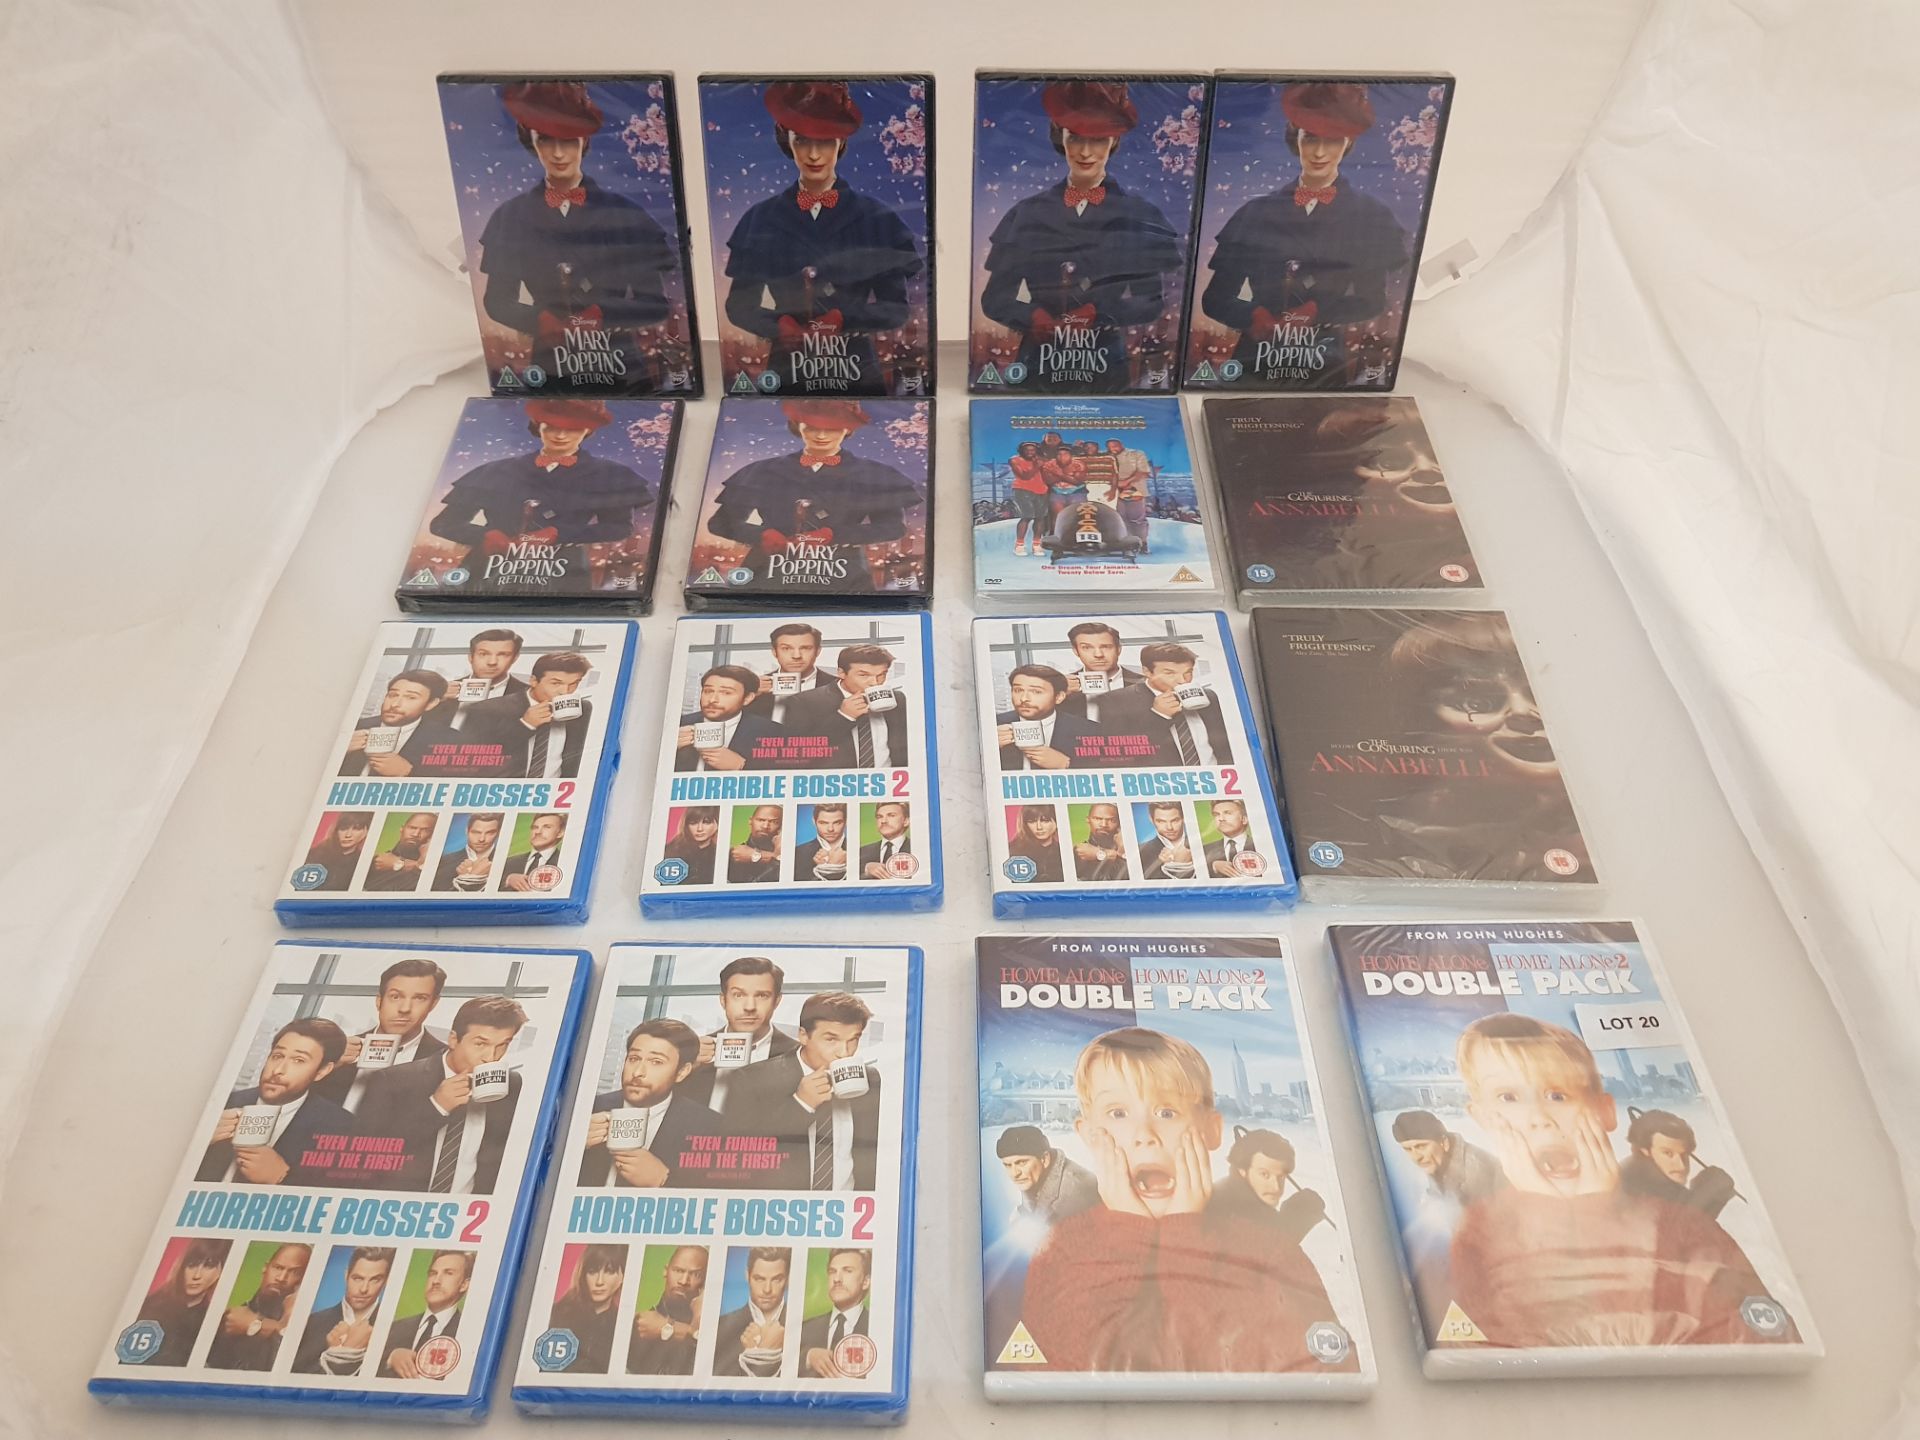 16 x Assorted DVDs to included Mary Poppins returns, Cool Runnings, Horrible Boss 2, Home alone d...